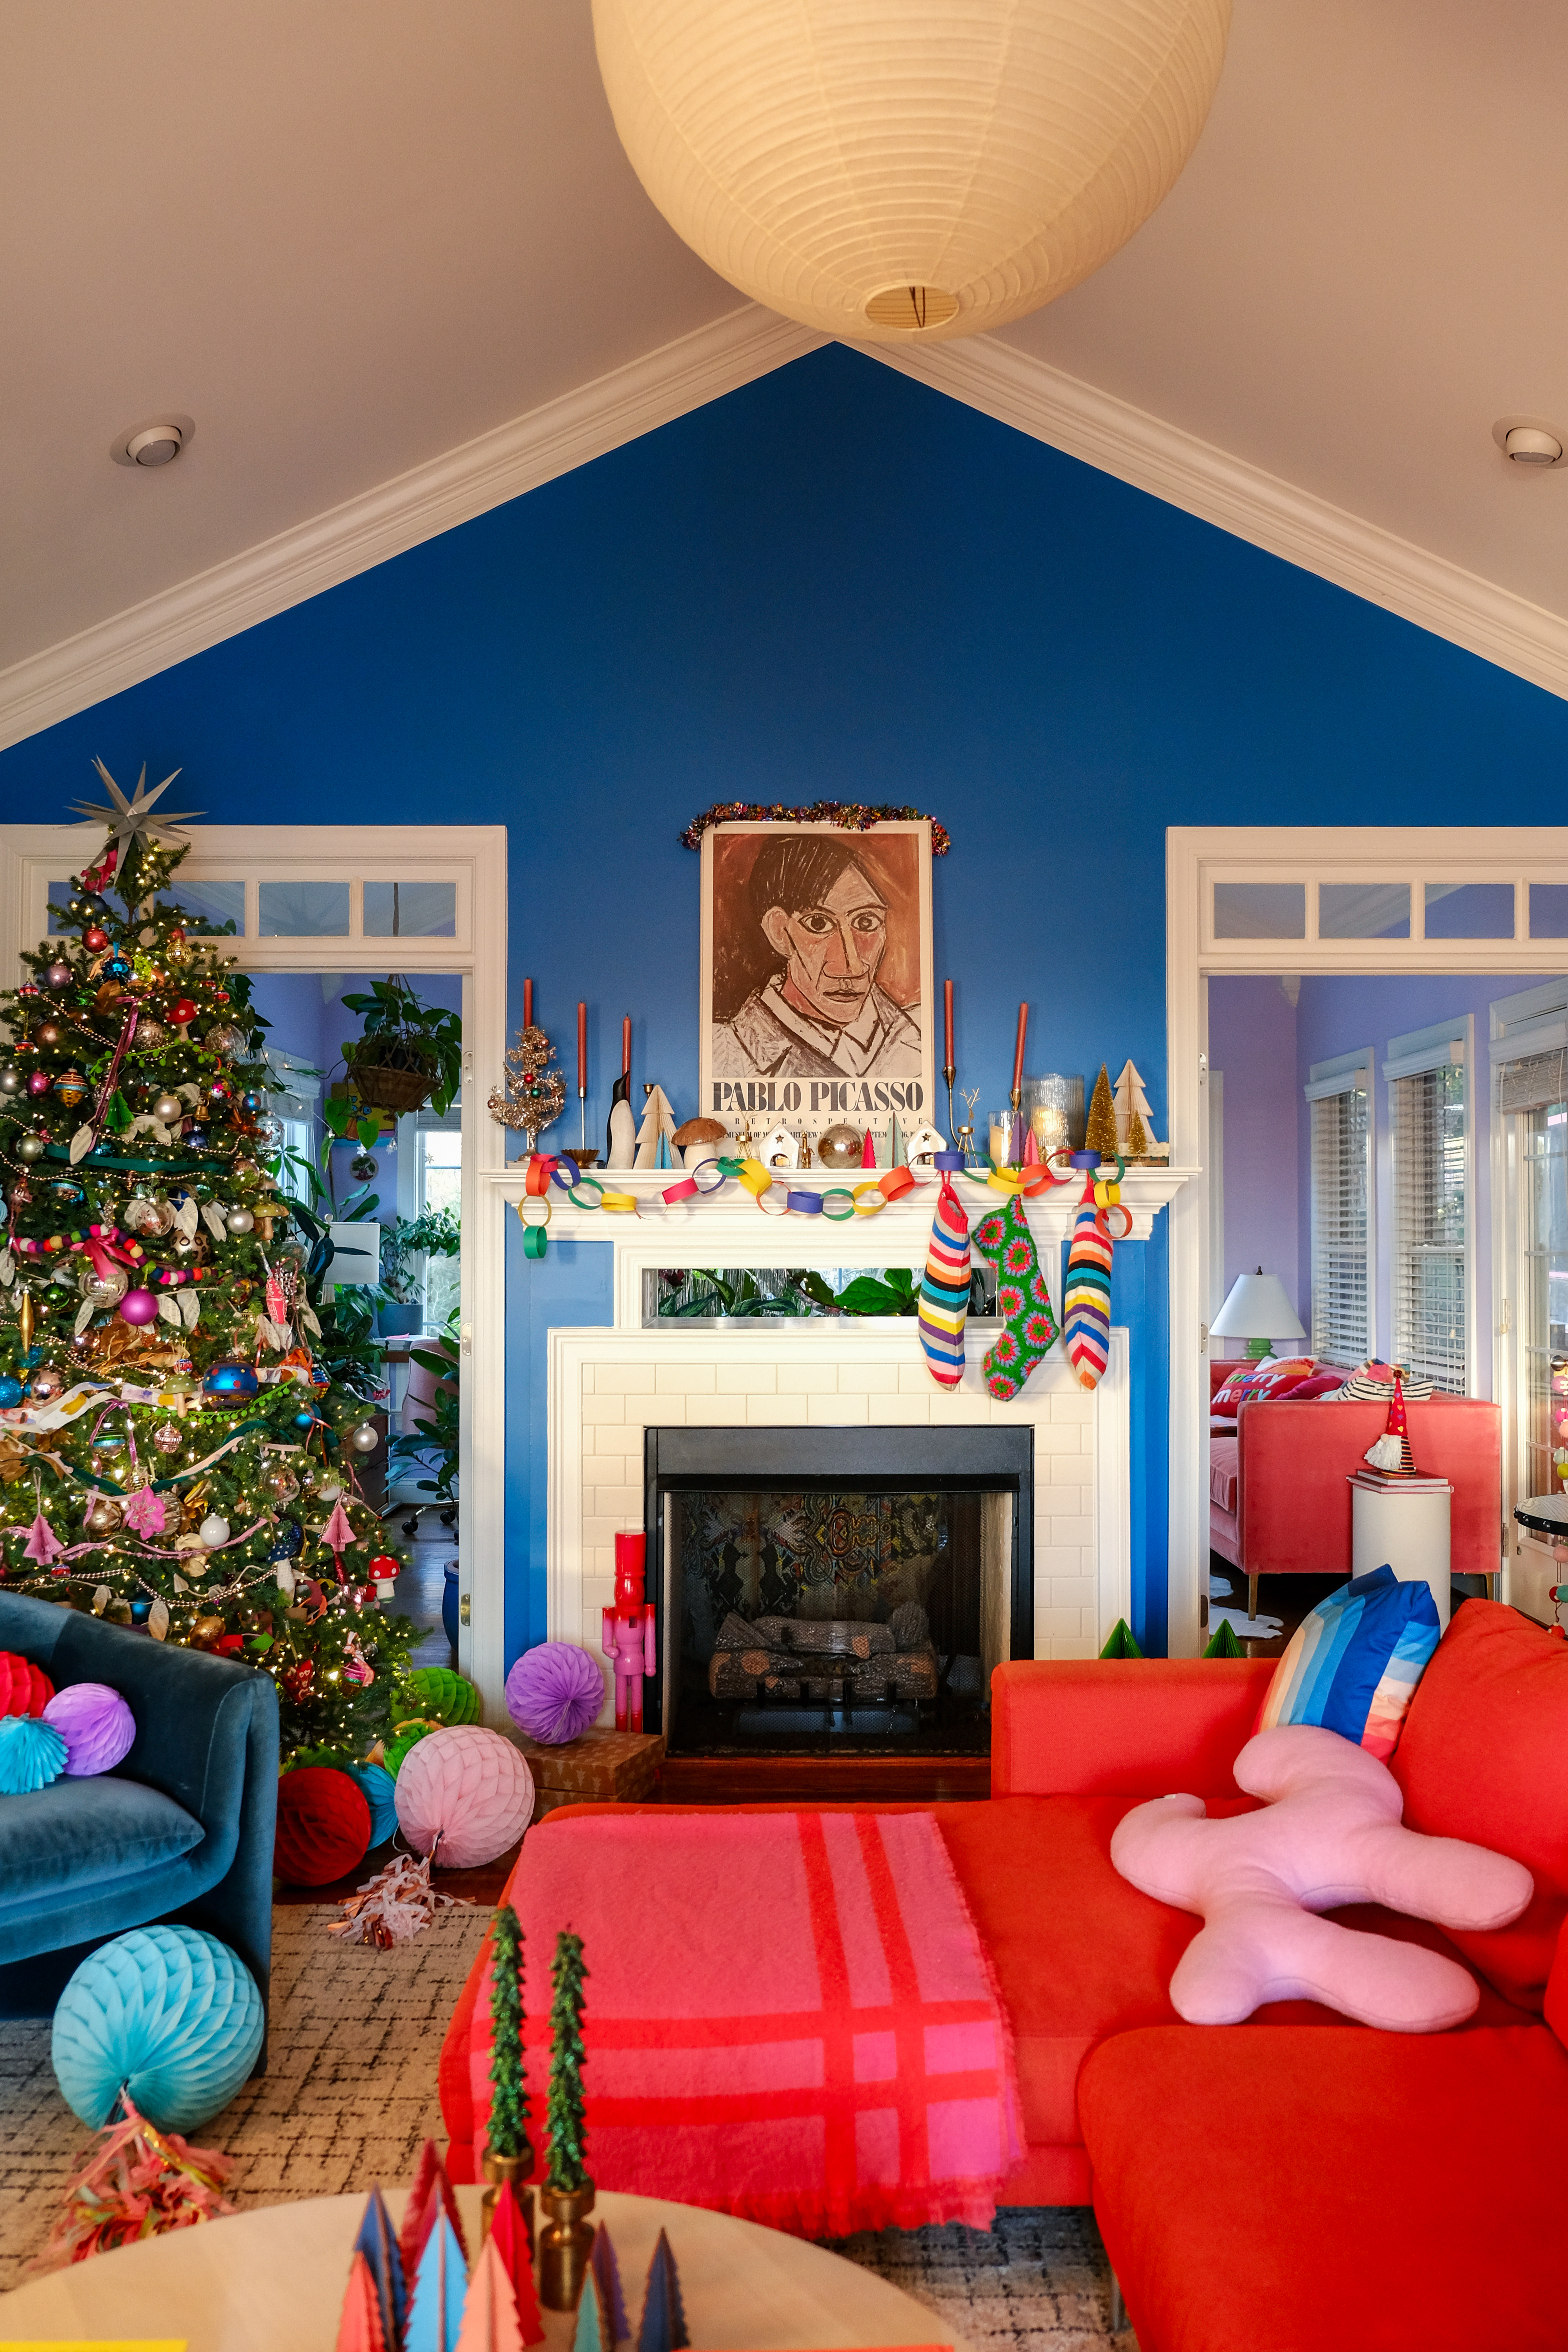 Livingroom decorated with colorful Christmas decor